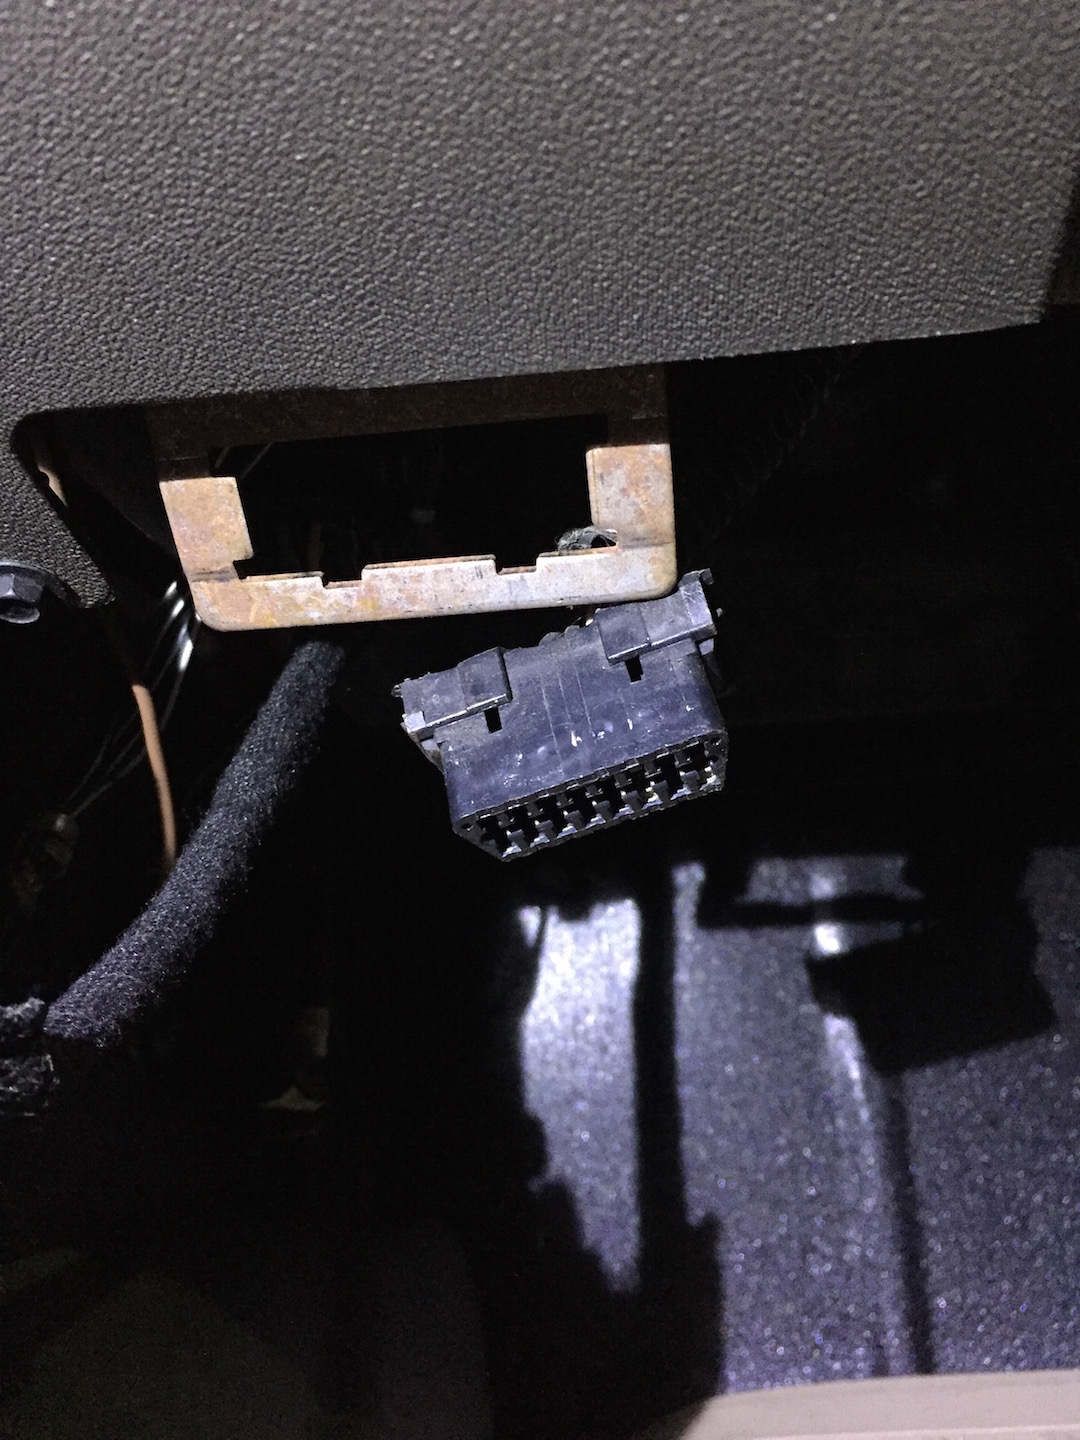 OBD-II Port Retaining Clip  - The top destination for Jeep JK  and JL Wrangler news, rumors, and discussion